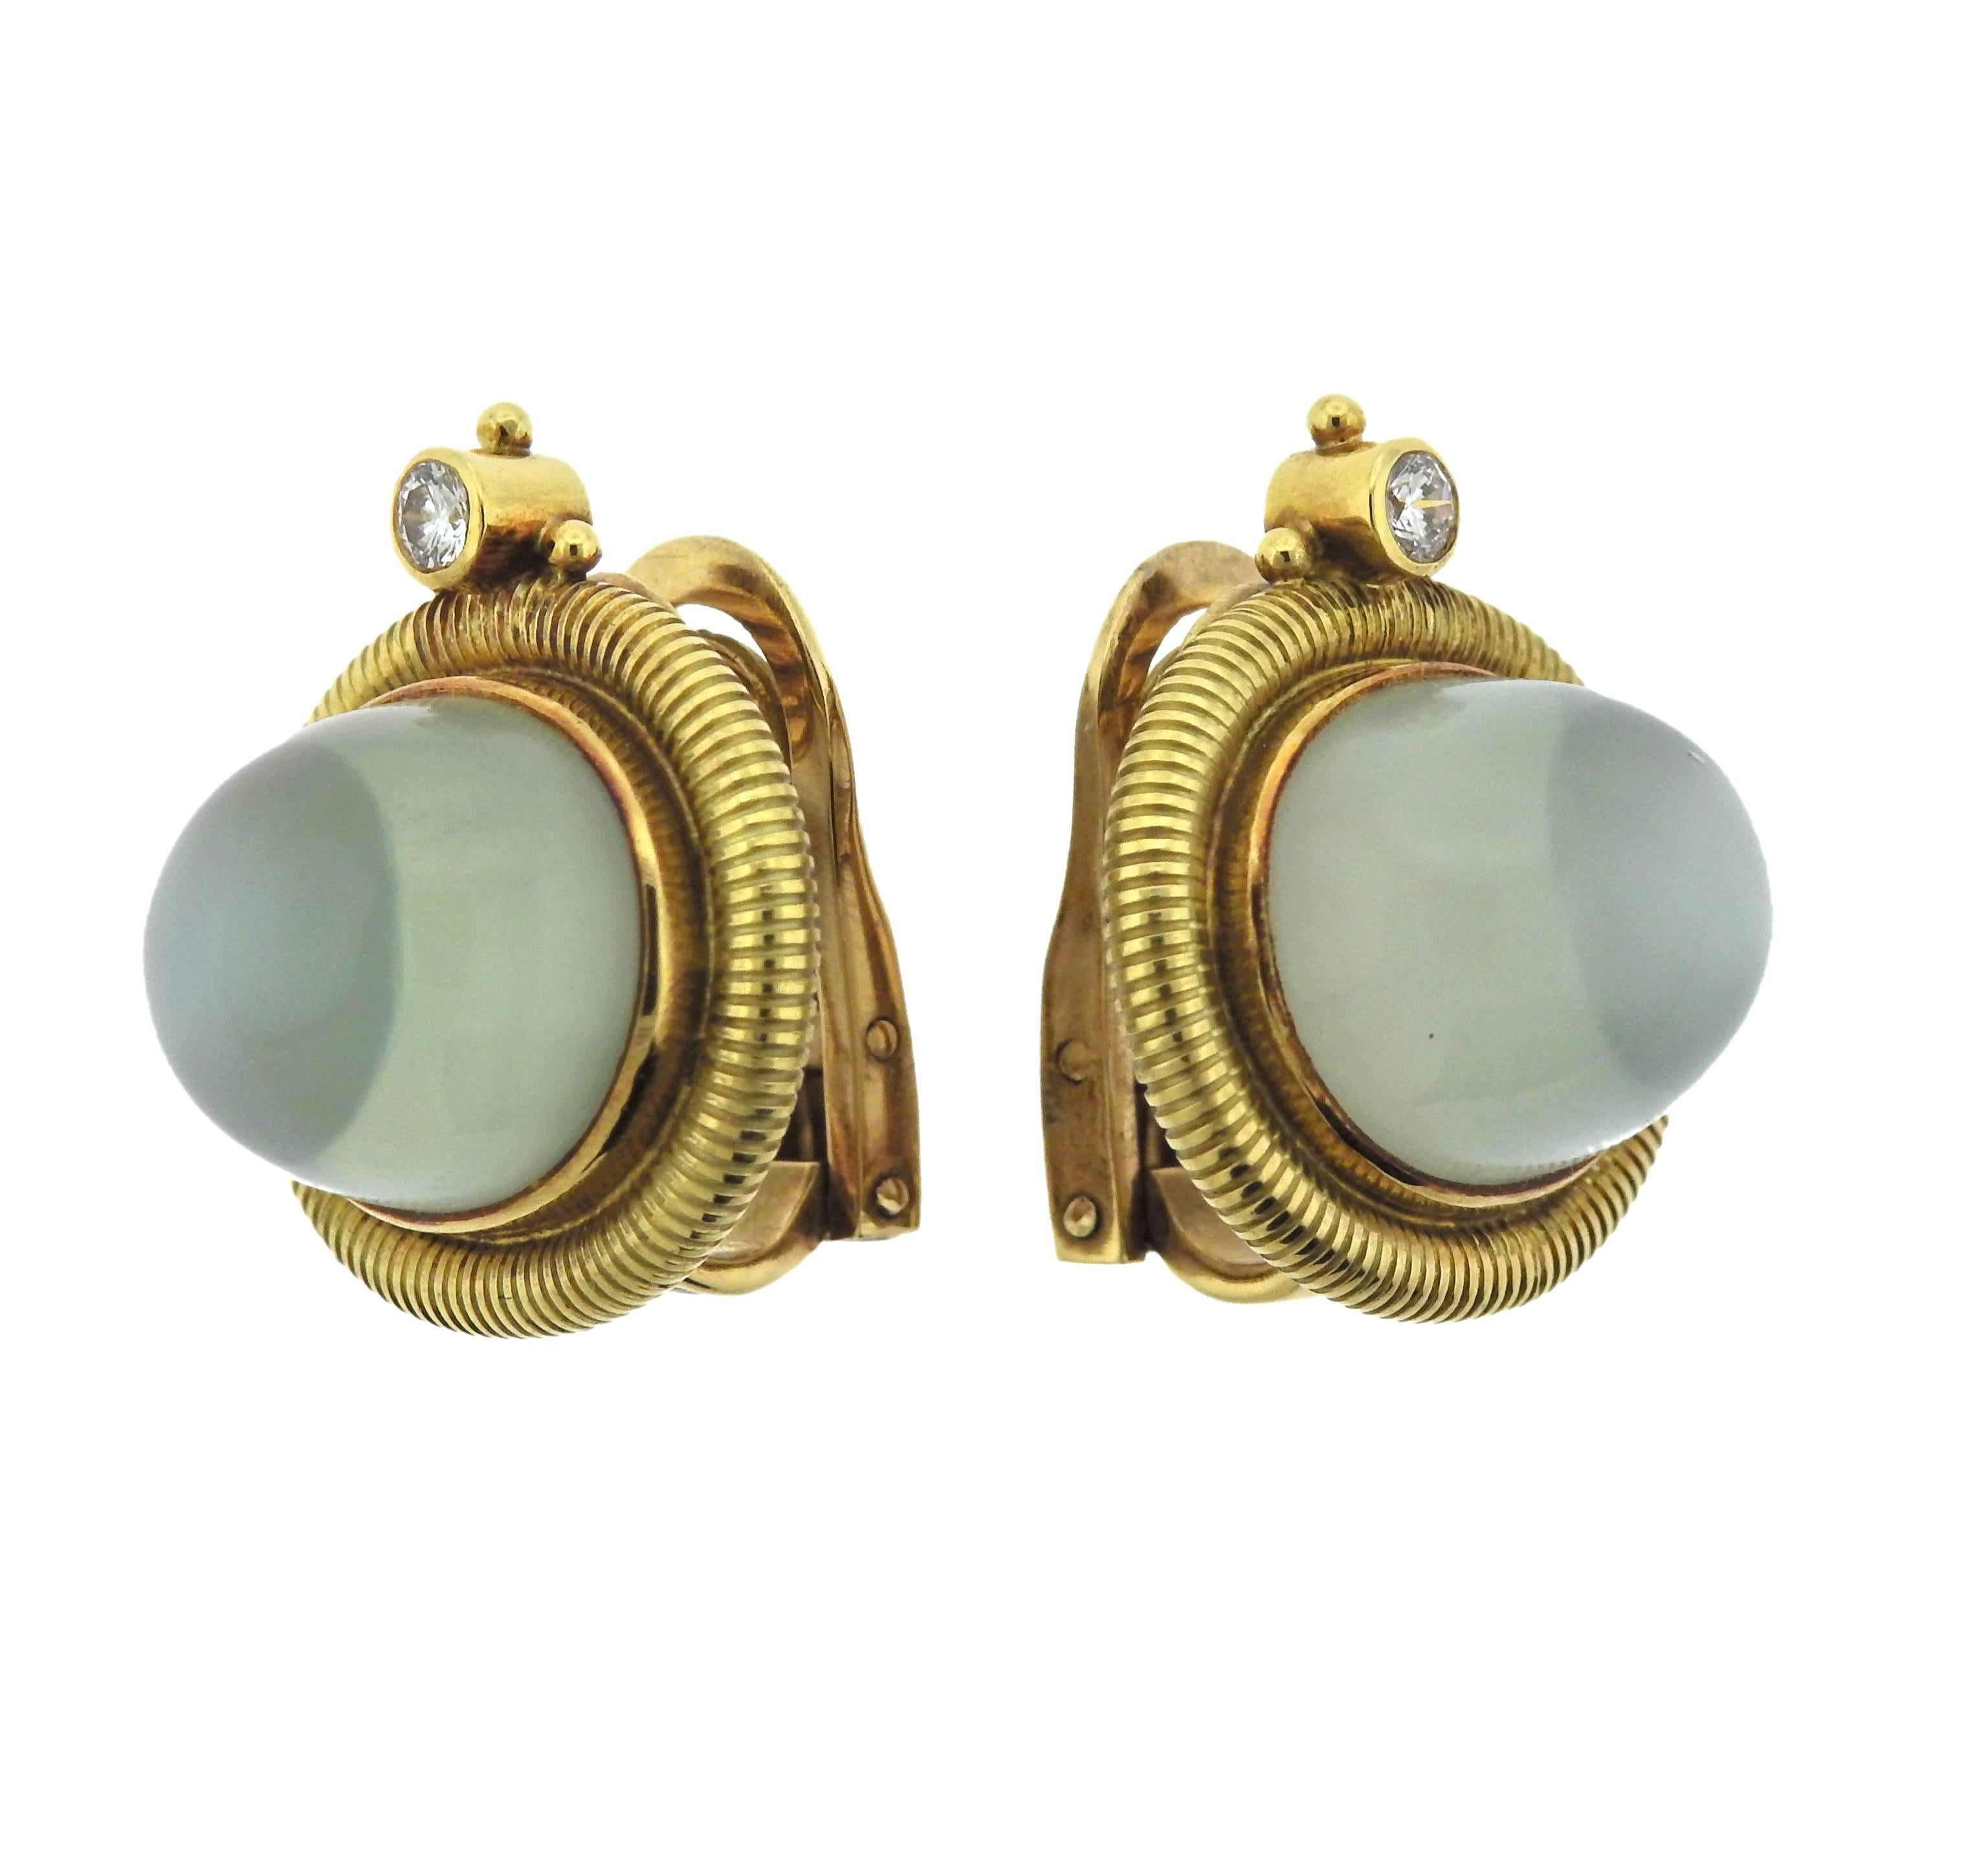  Pair of 18k gold Elizabeth Gage earrings, set with Aquamarine cabochons - 14.6mm x 12.5mm, backed with mother of pearl , adorned with approx. 0.18ctw in G/VS diamonds. Earrings are 20mm x 22mm, weigh 24.5 grams. Marked: Gage, English mark.